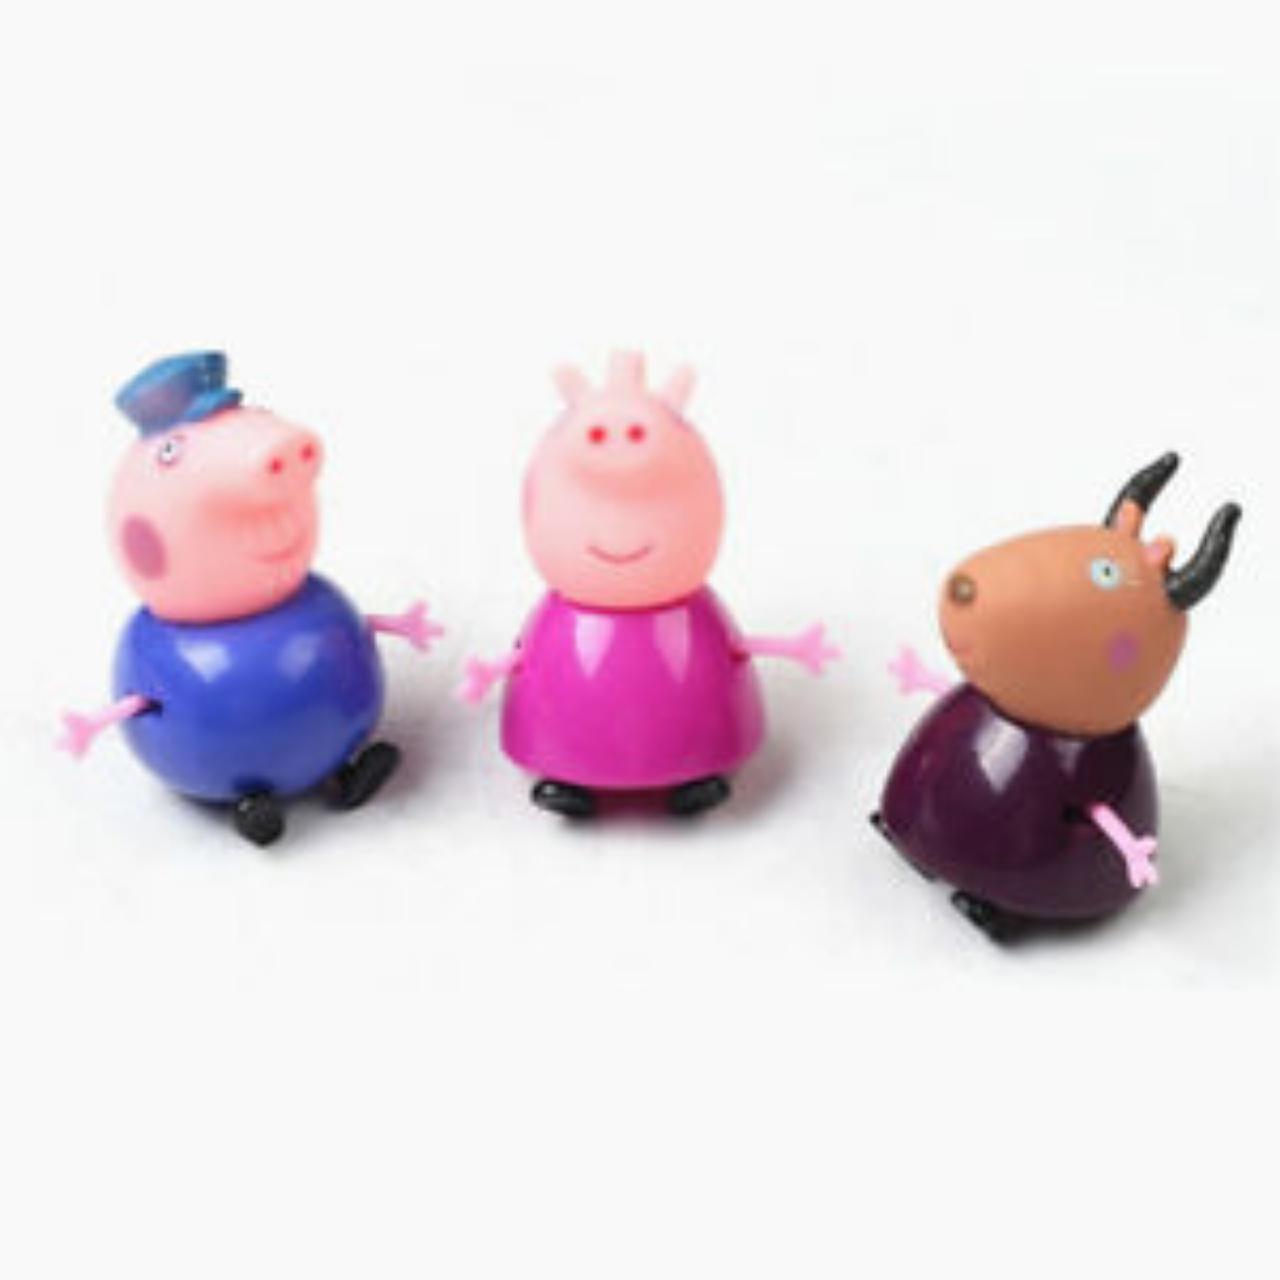 25Pcs/Set Peppa Pig Family&Friends Emily Rebecca Suzy Action Figures Toys Gift